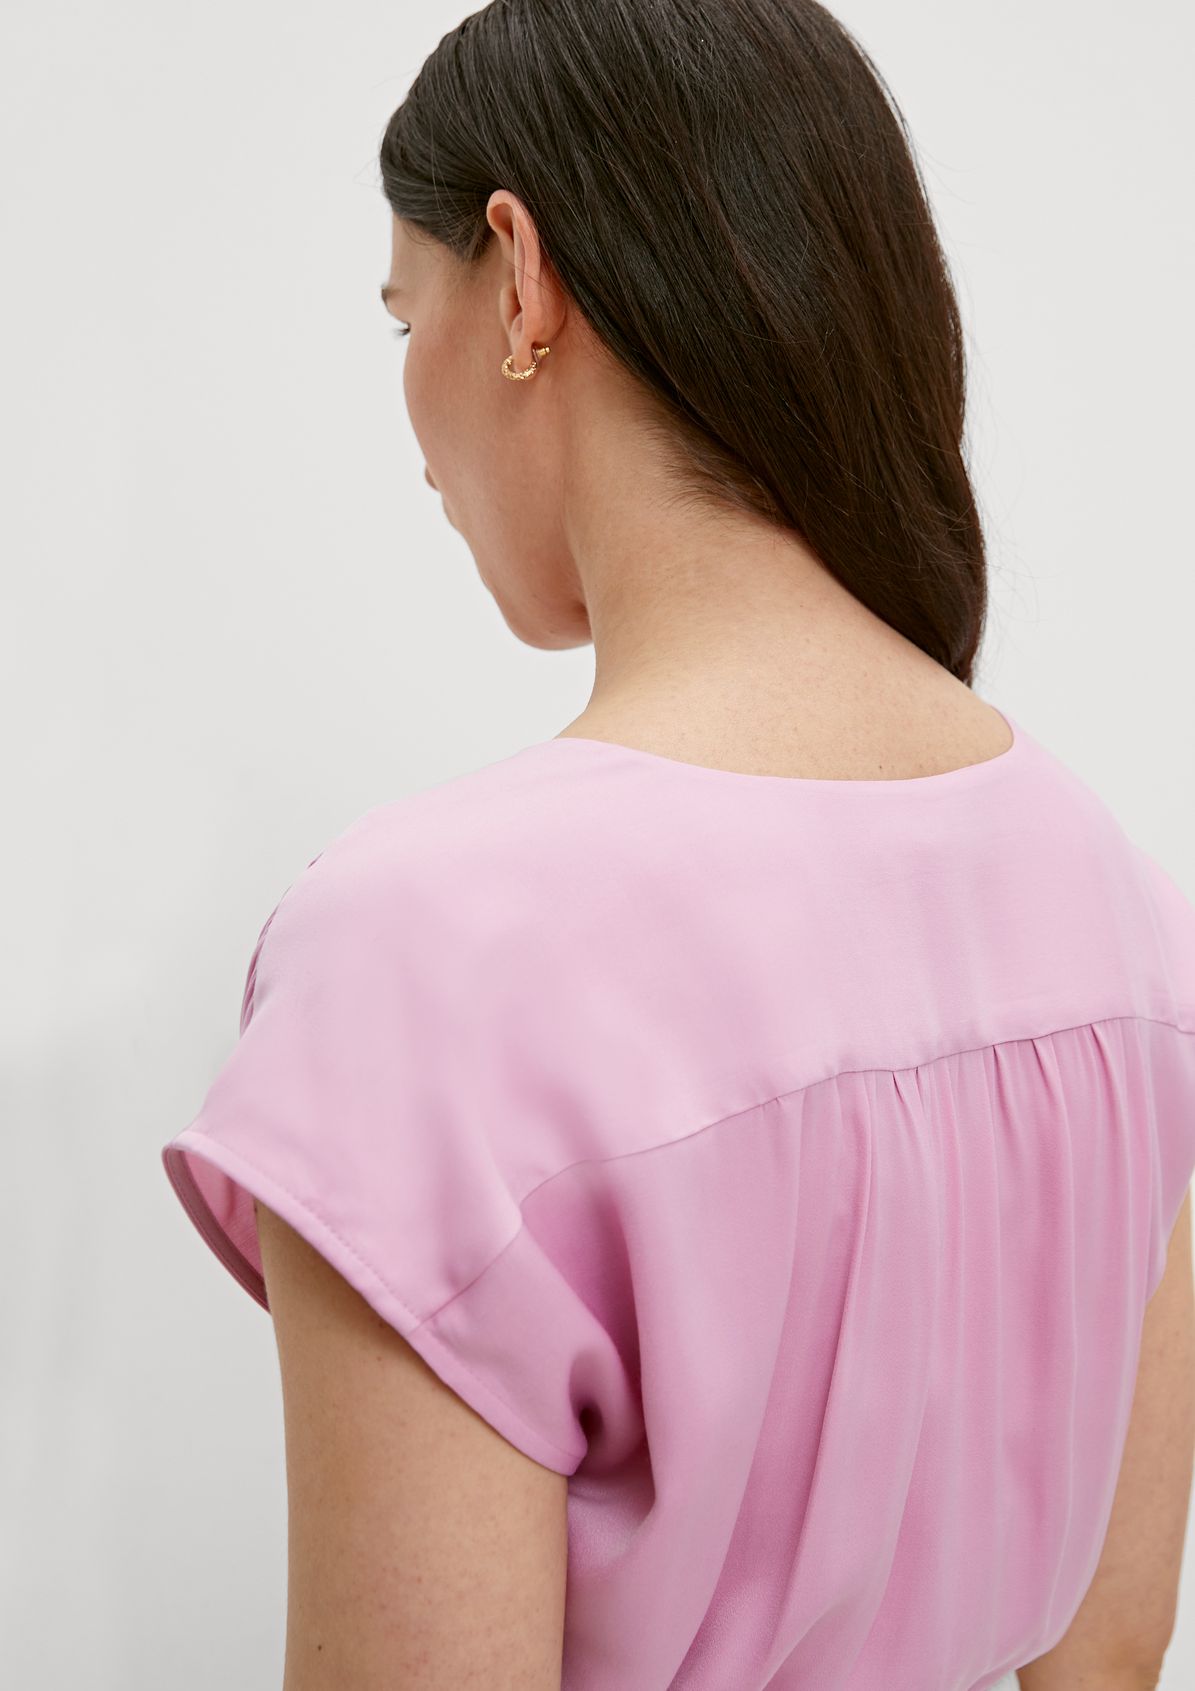 Satin blouse in a viscose blend from comma